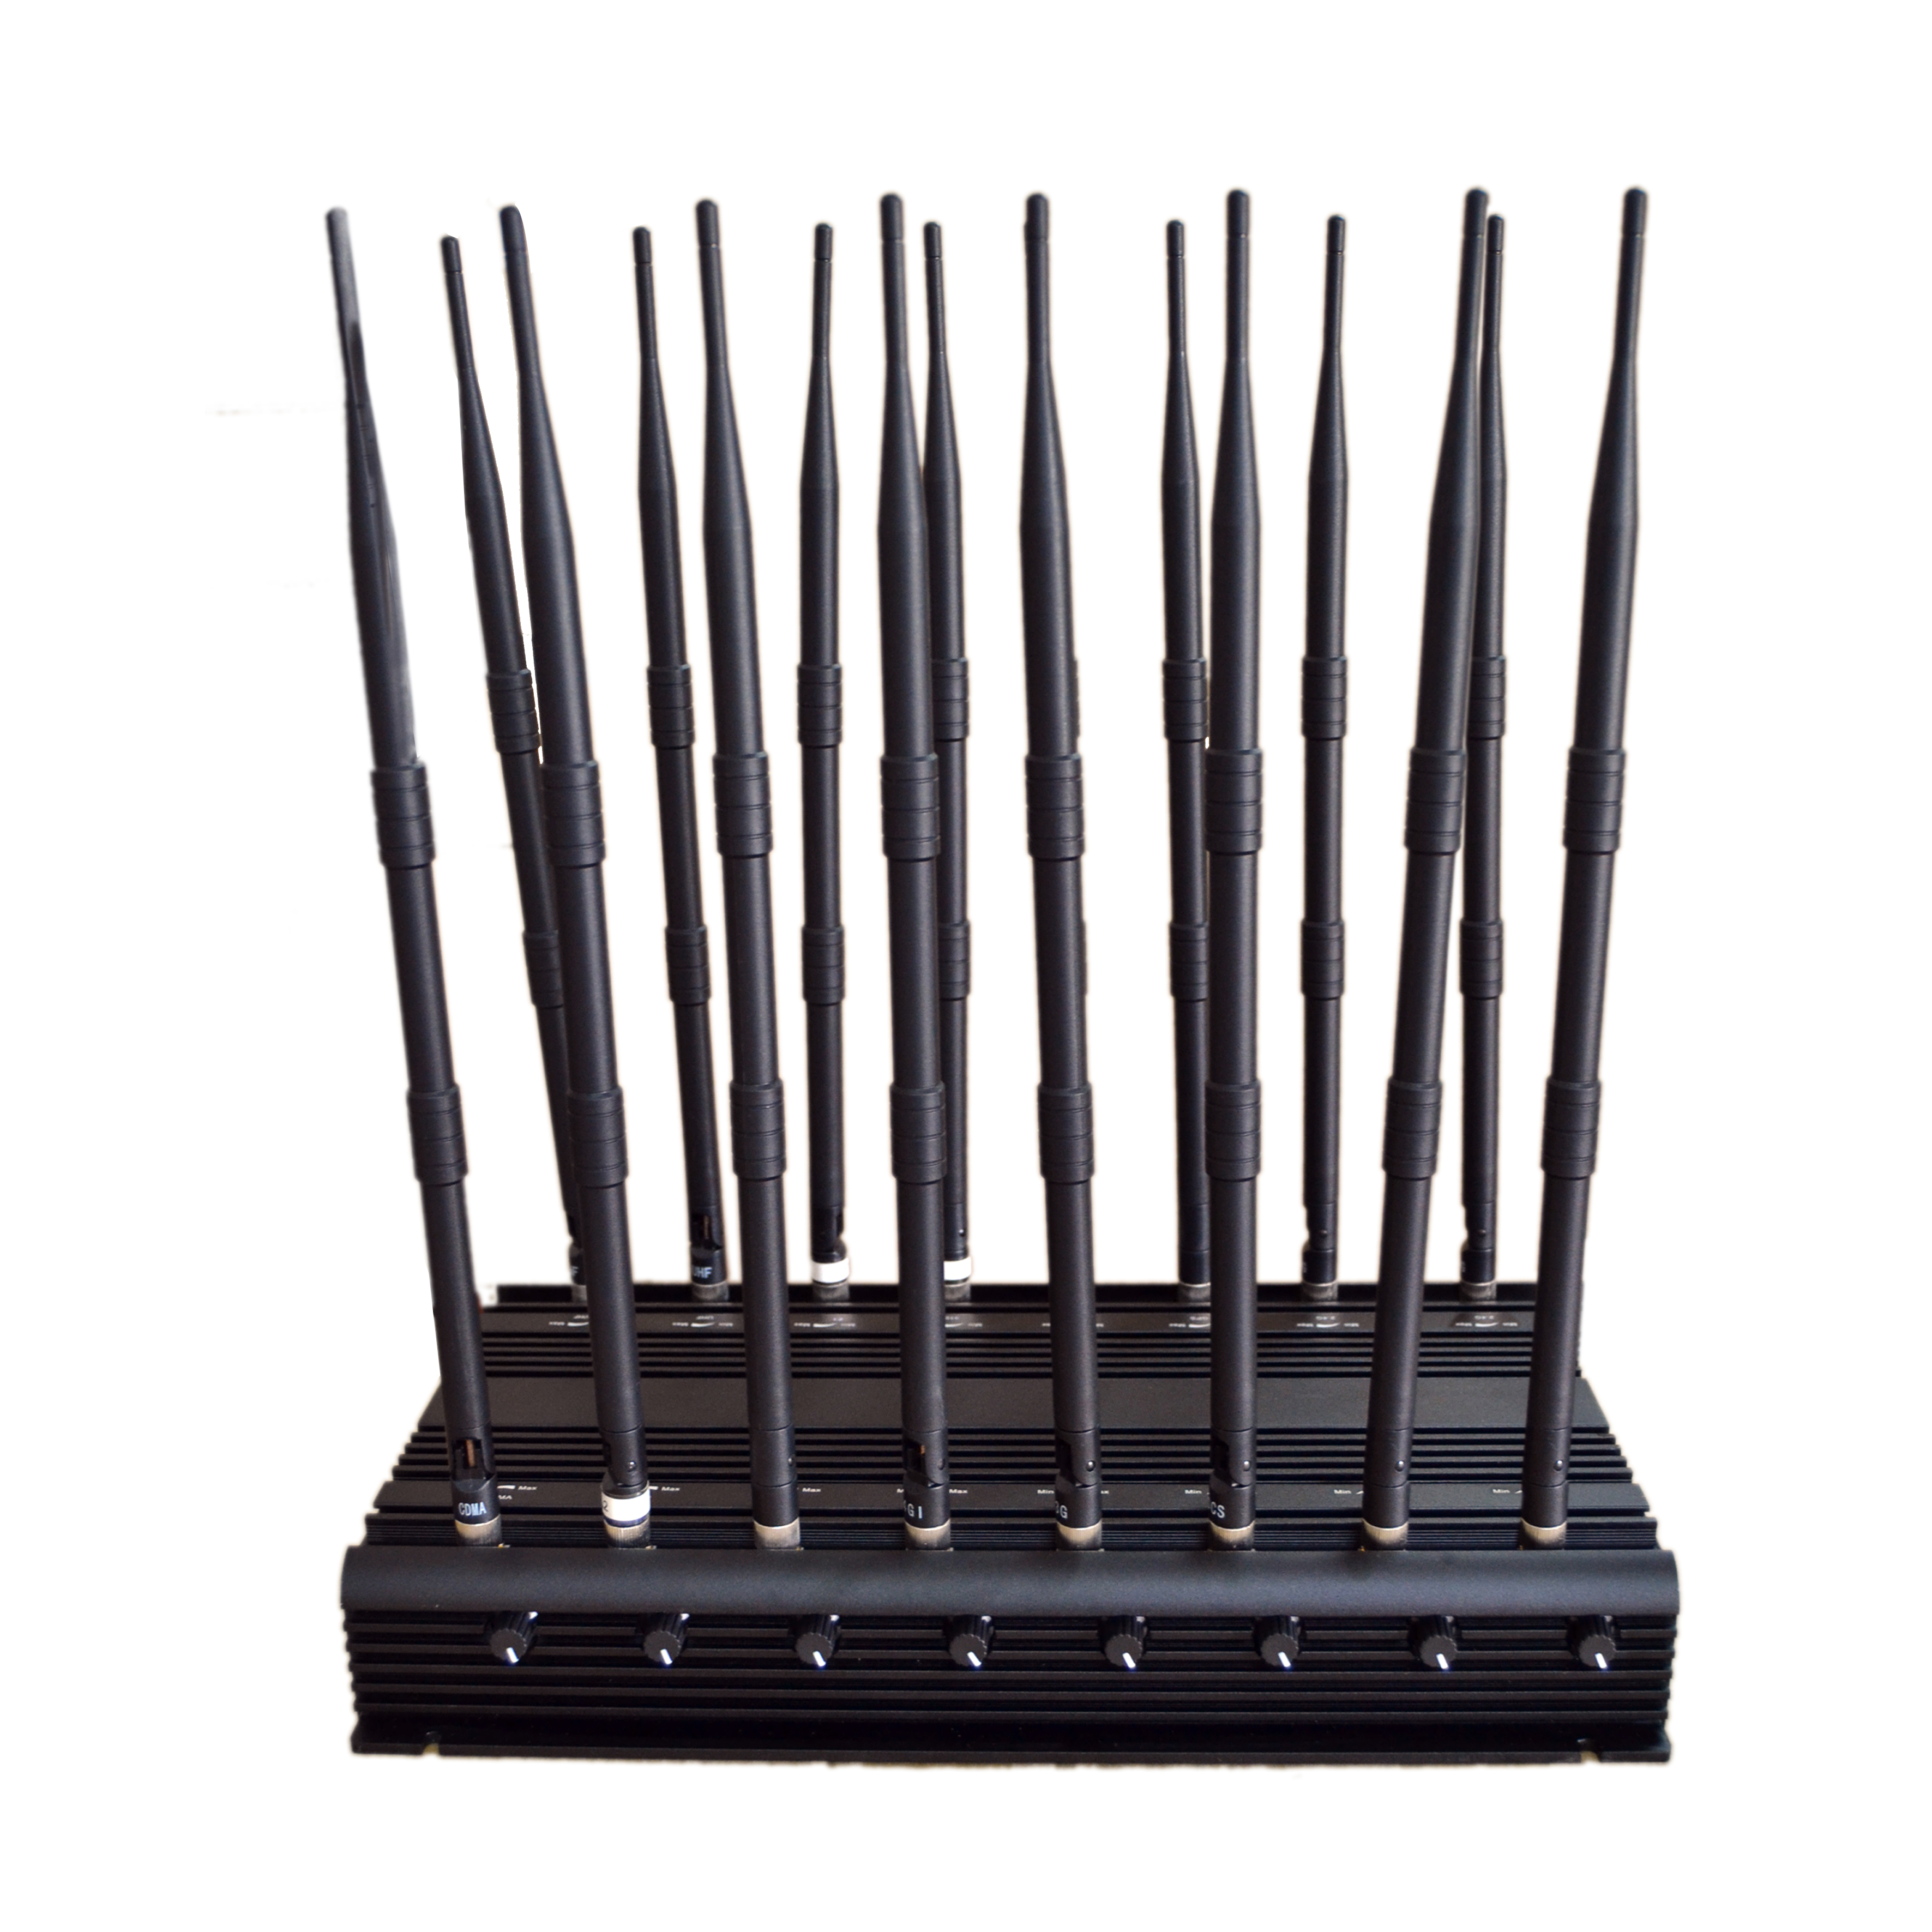 jammer legal zoom zoom , 38w High Power Desktop Multi-Band WiFi GPS Mobile Signal Jammer